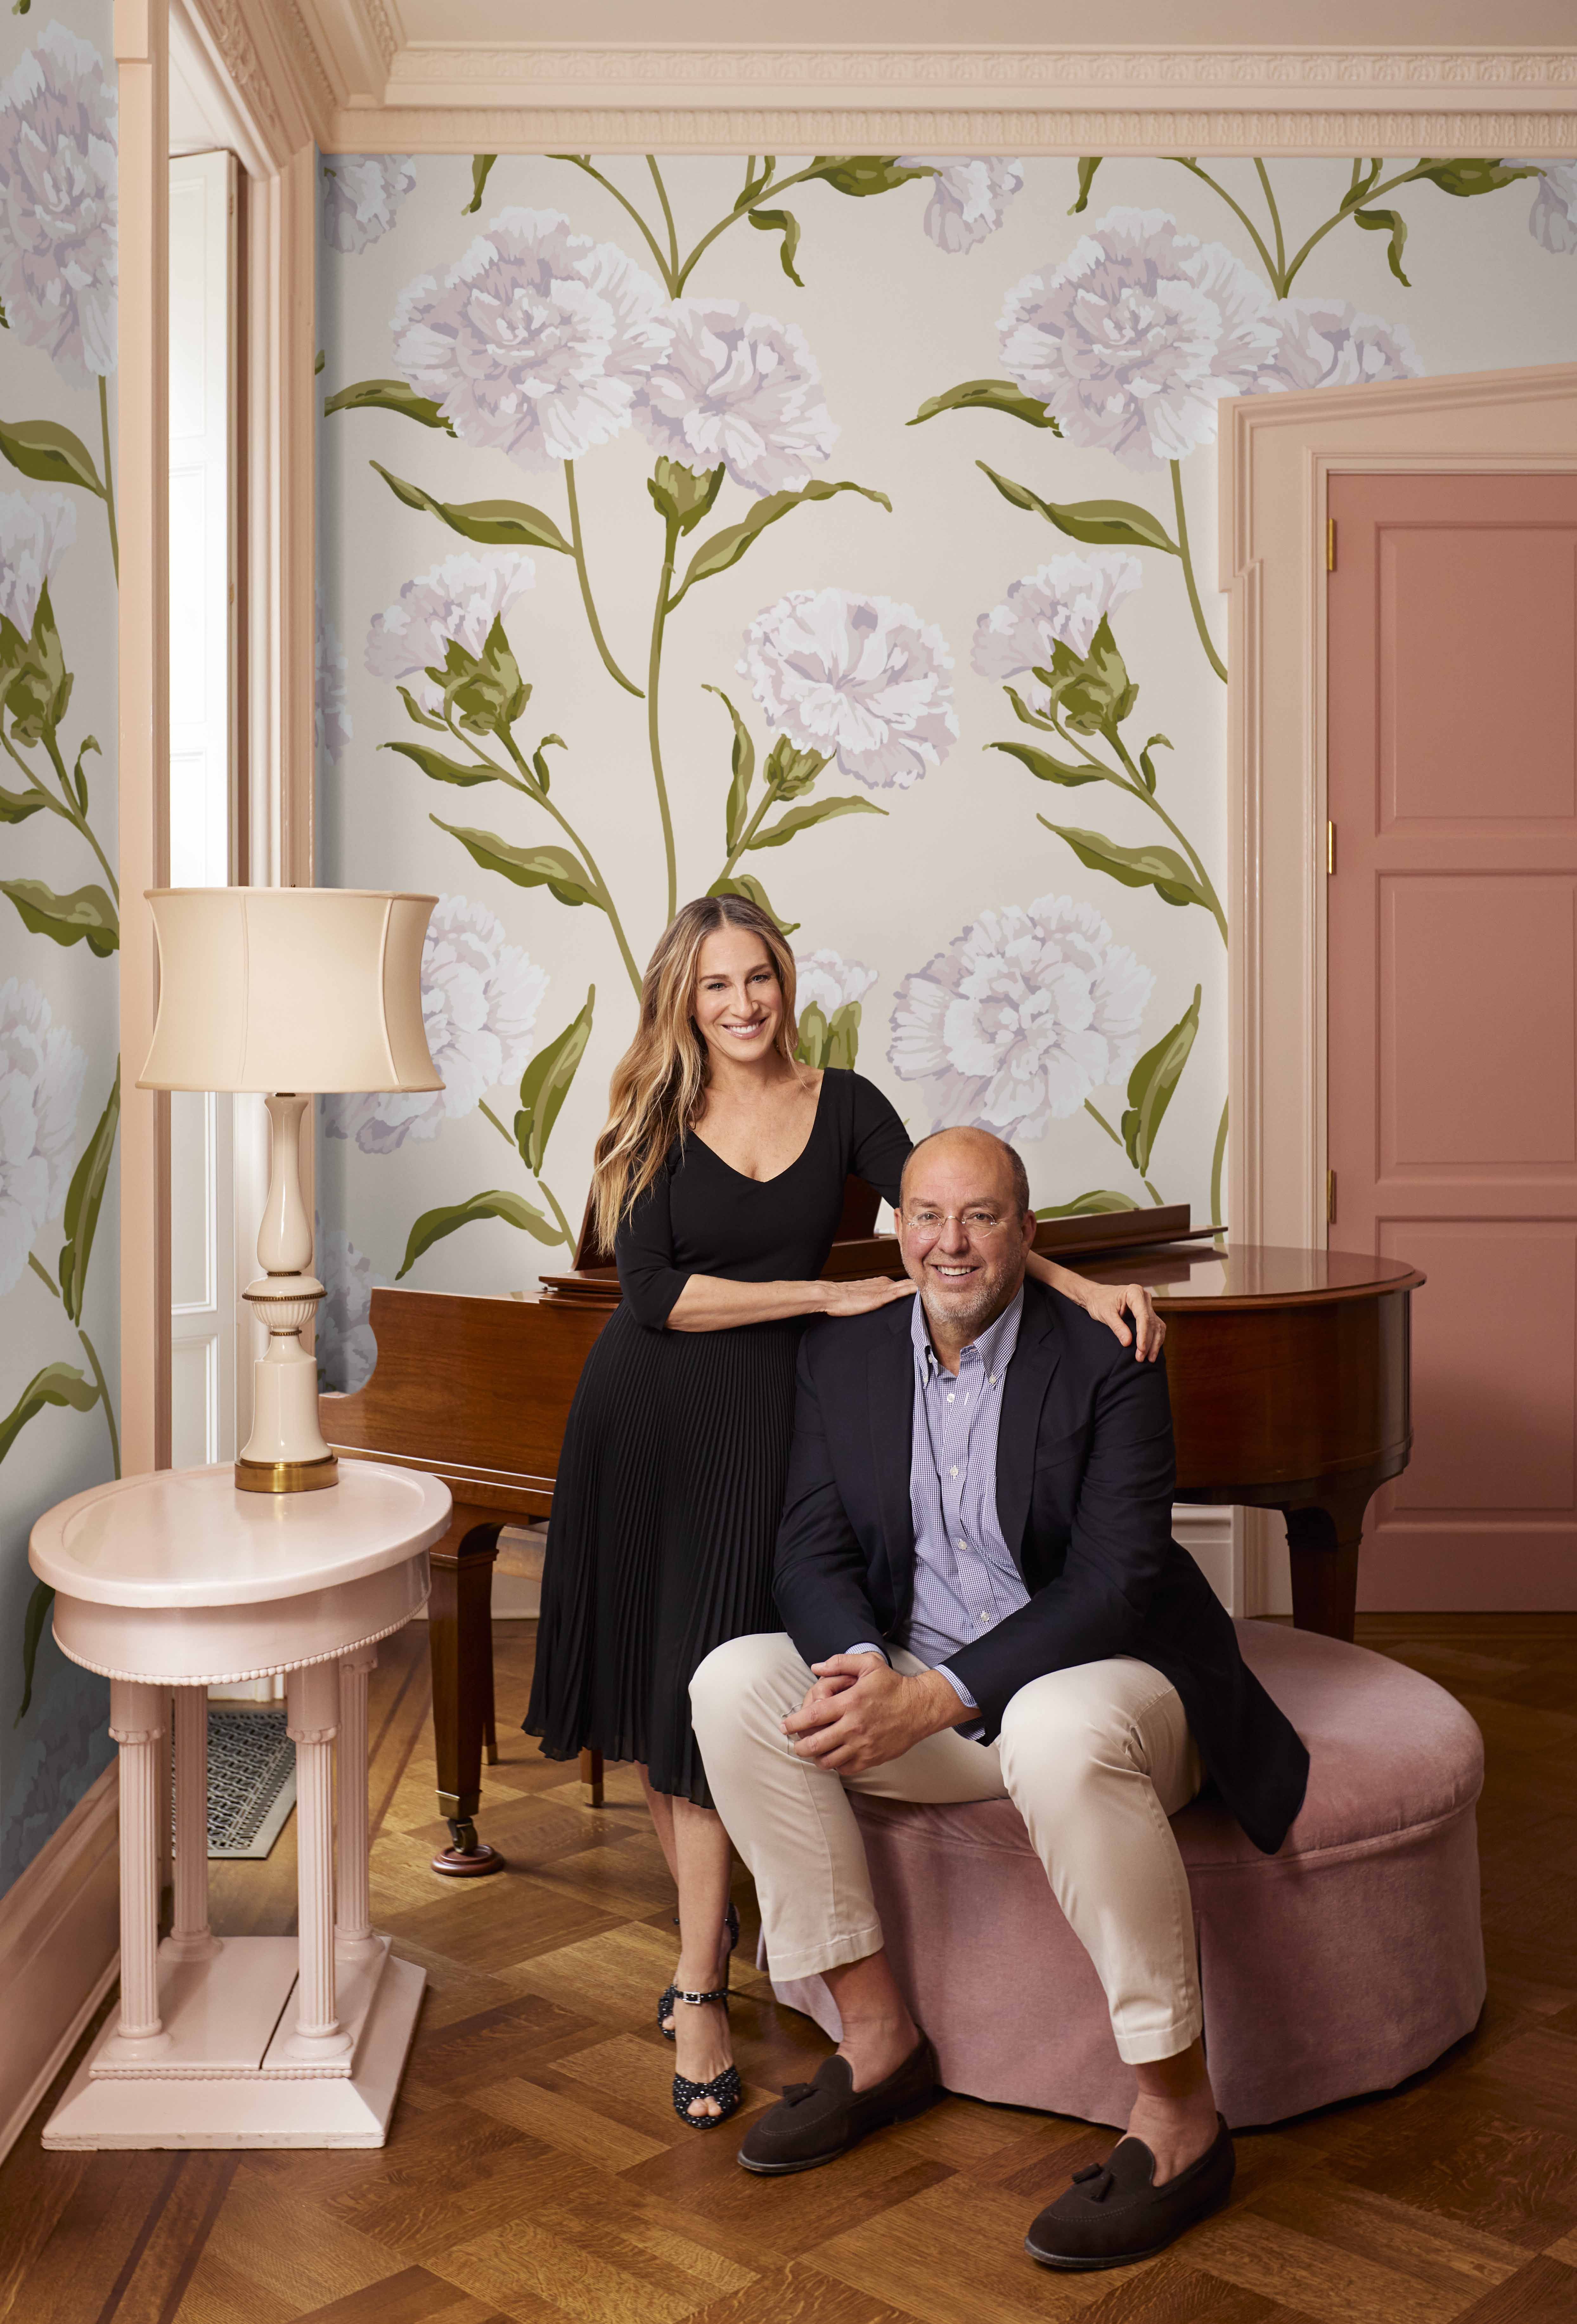 Sarah Jessica Parker Is Launching Her Own Wallpaper Line